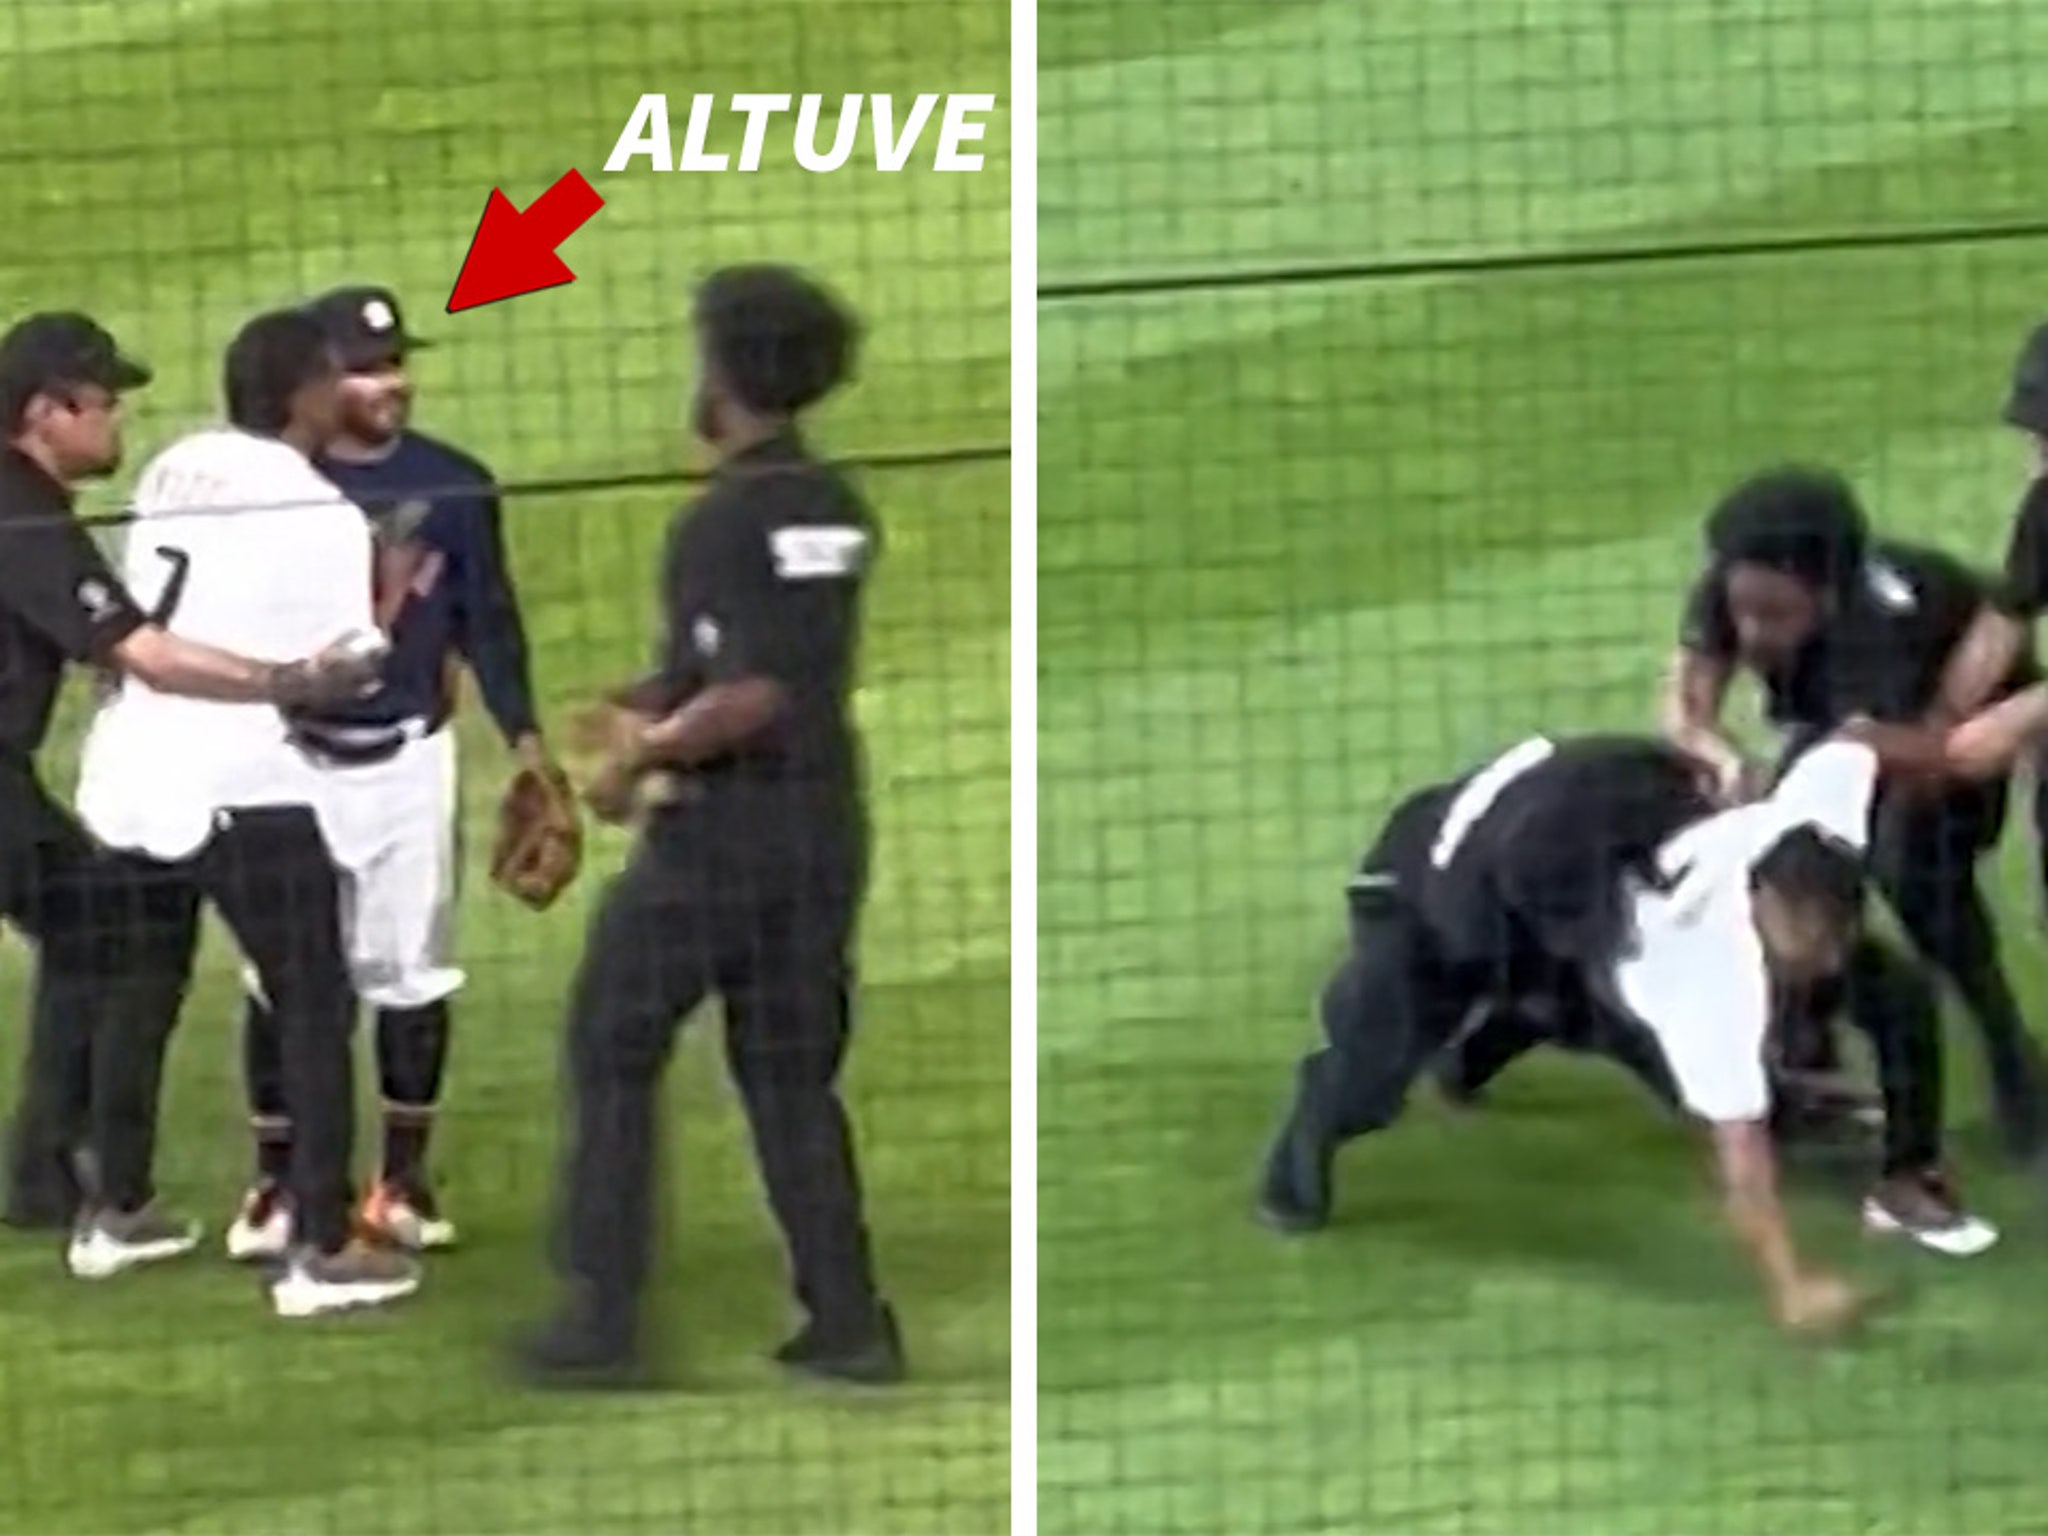 Houston Astros hero José Altuve hilariously hugs it out in viral